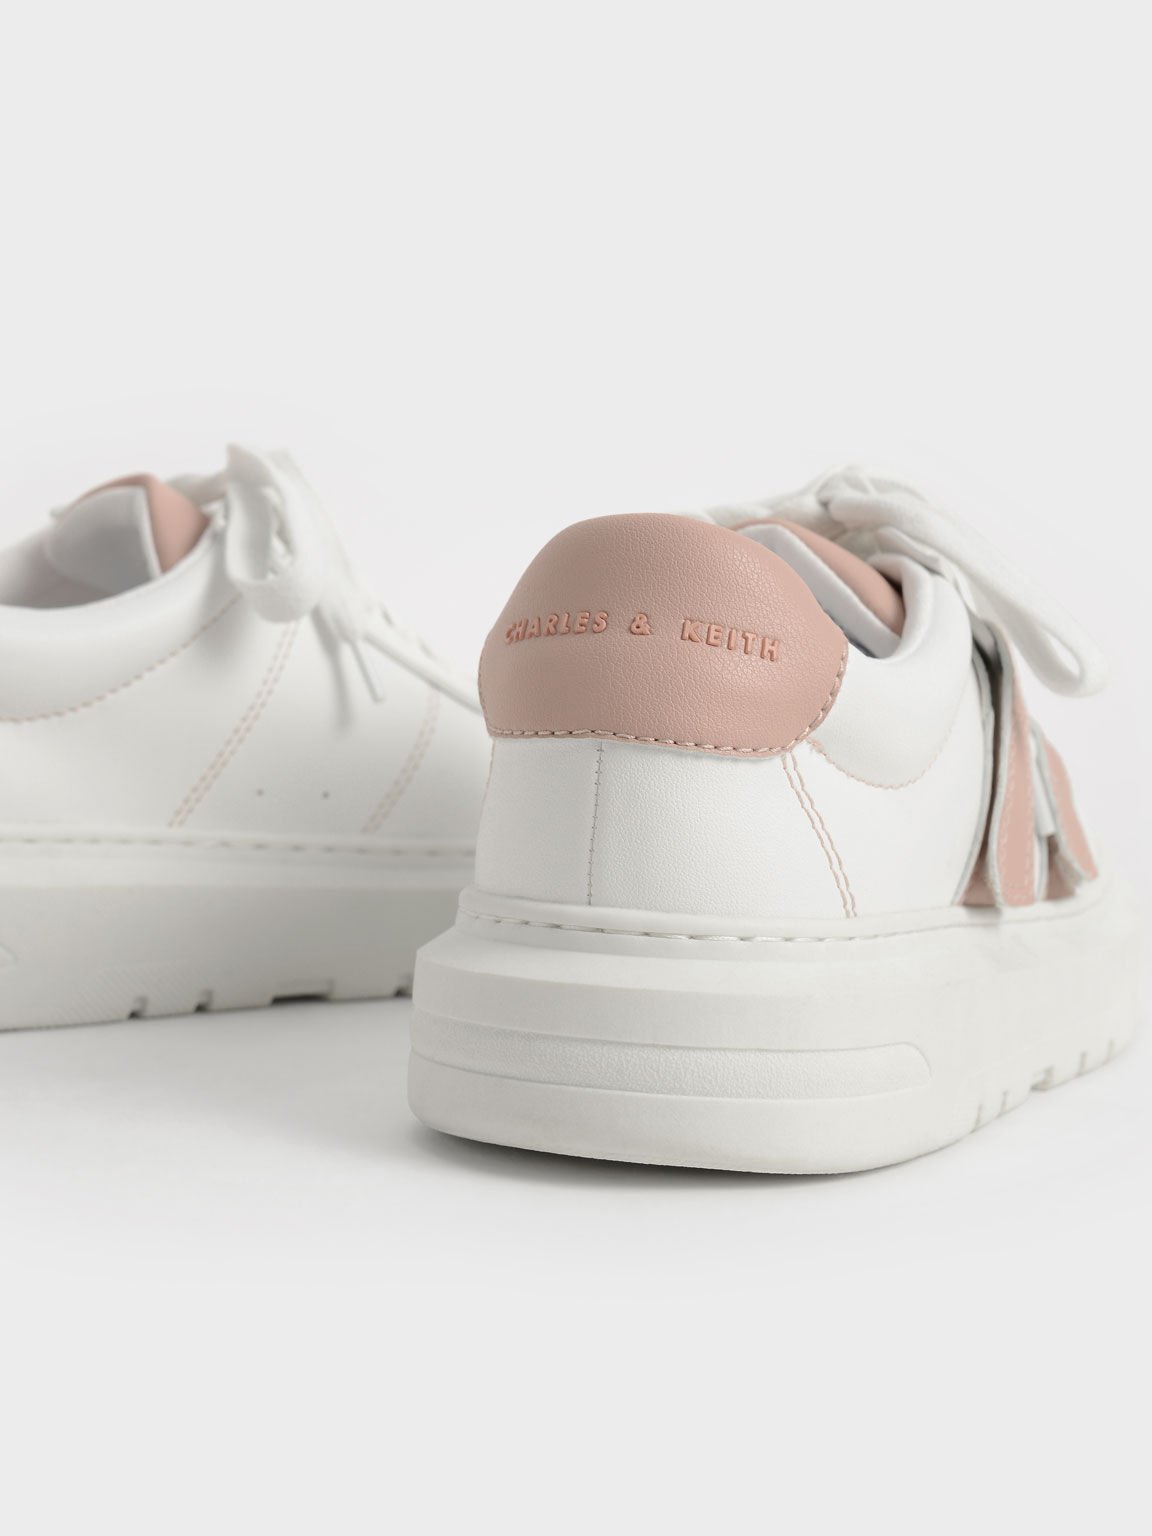 Lace-Up Velcro Sneakers, Nude, hi-res